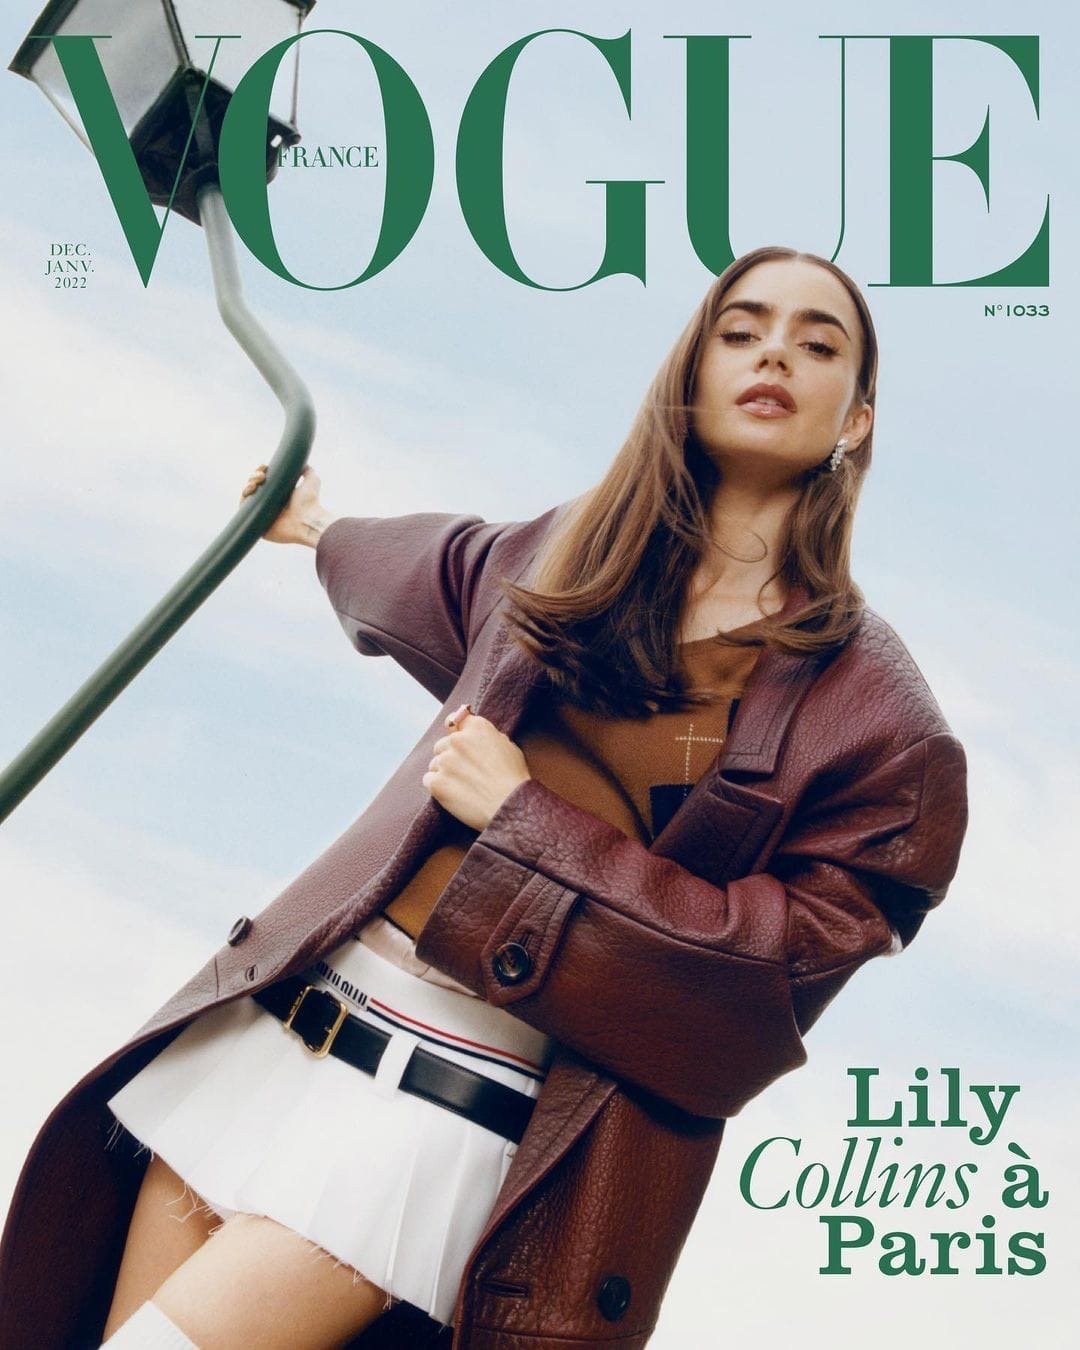 Lily Collins for Vogue France – December 2022/January 2023 - YESON 